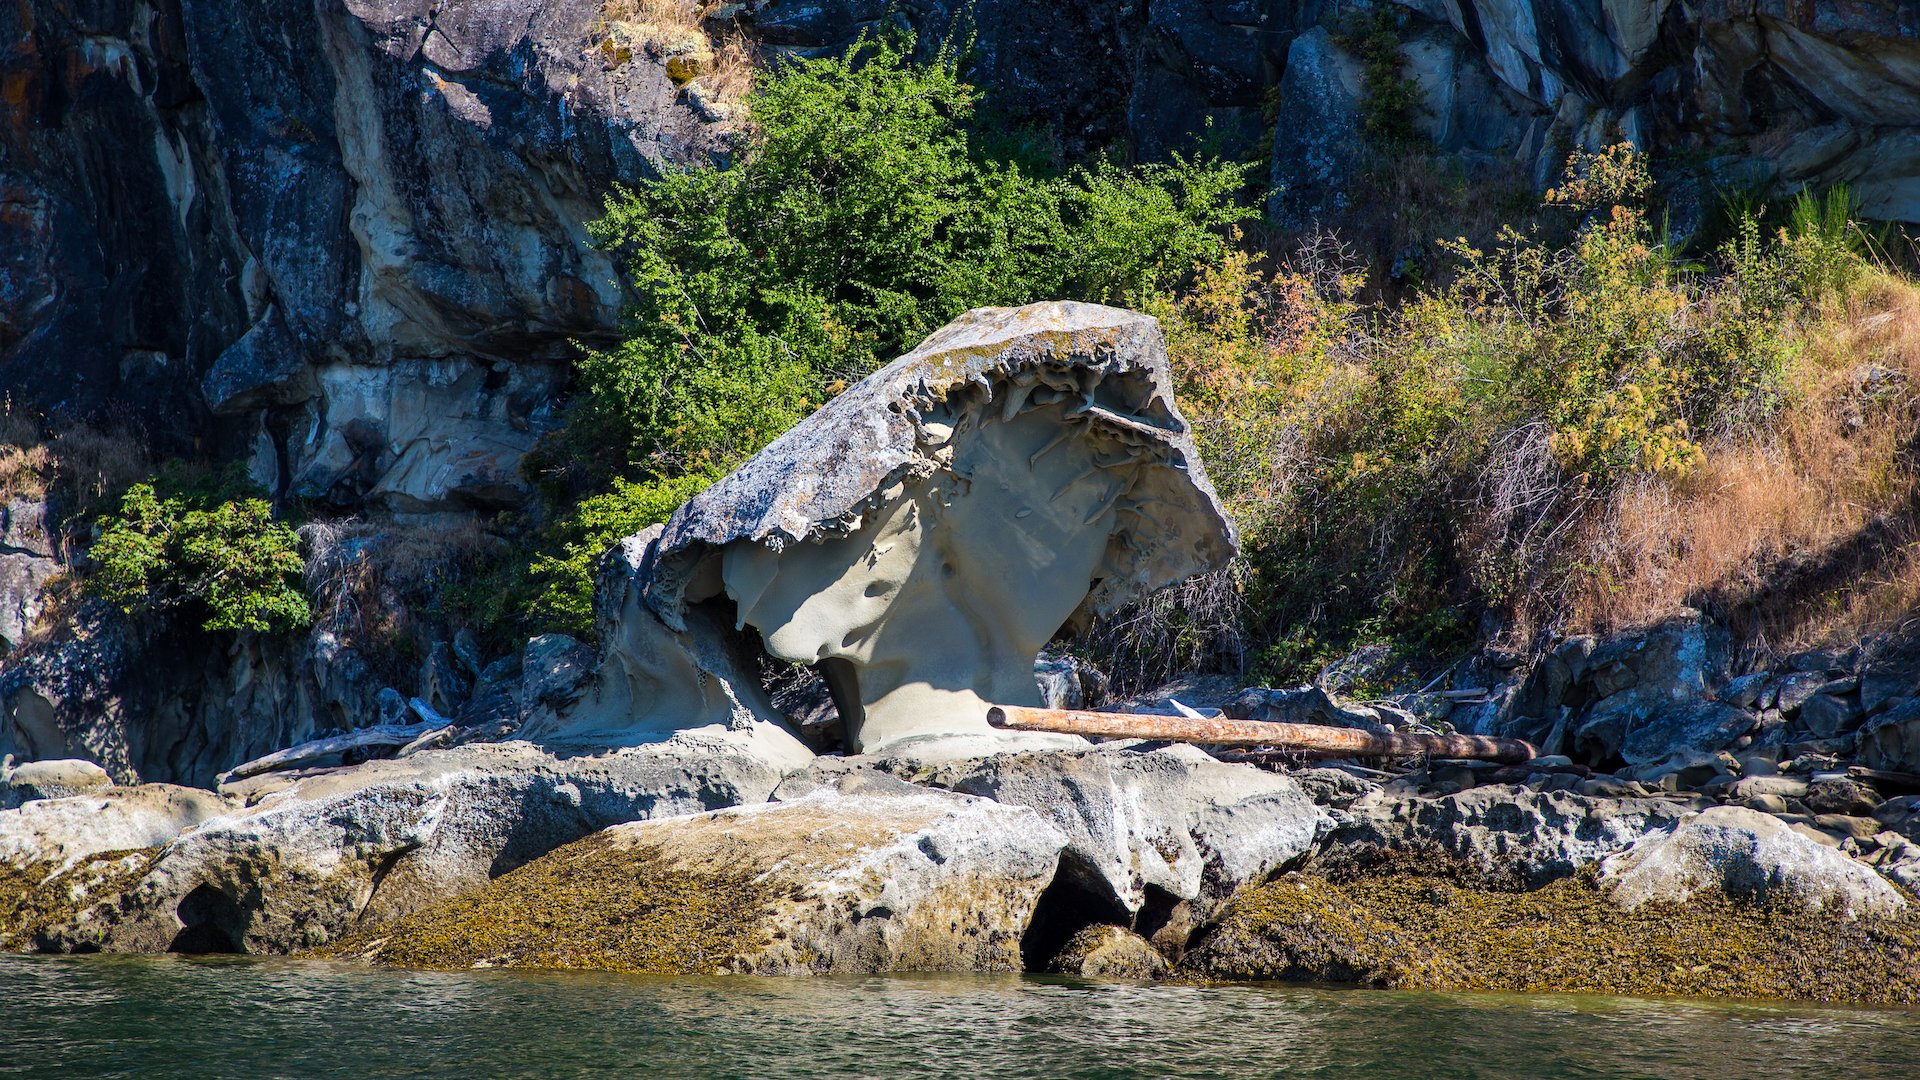  One of Galiano’s most famous features, Mushroom Rock as we cruised by. 